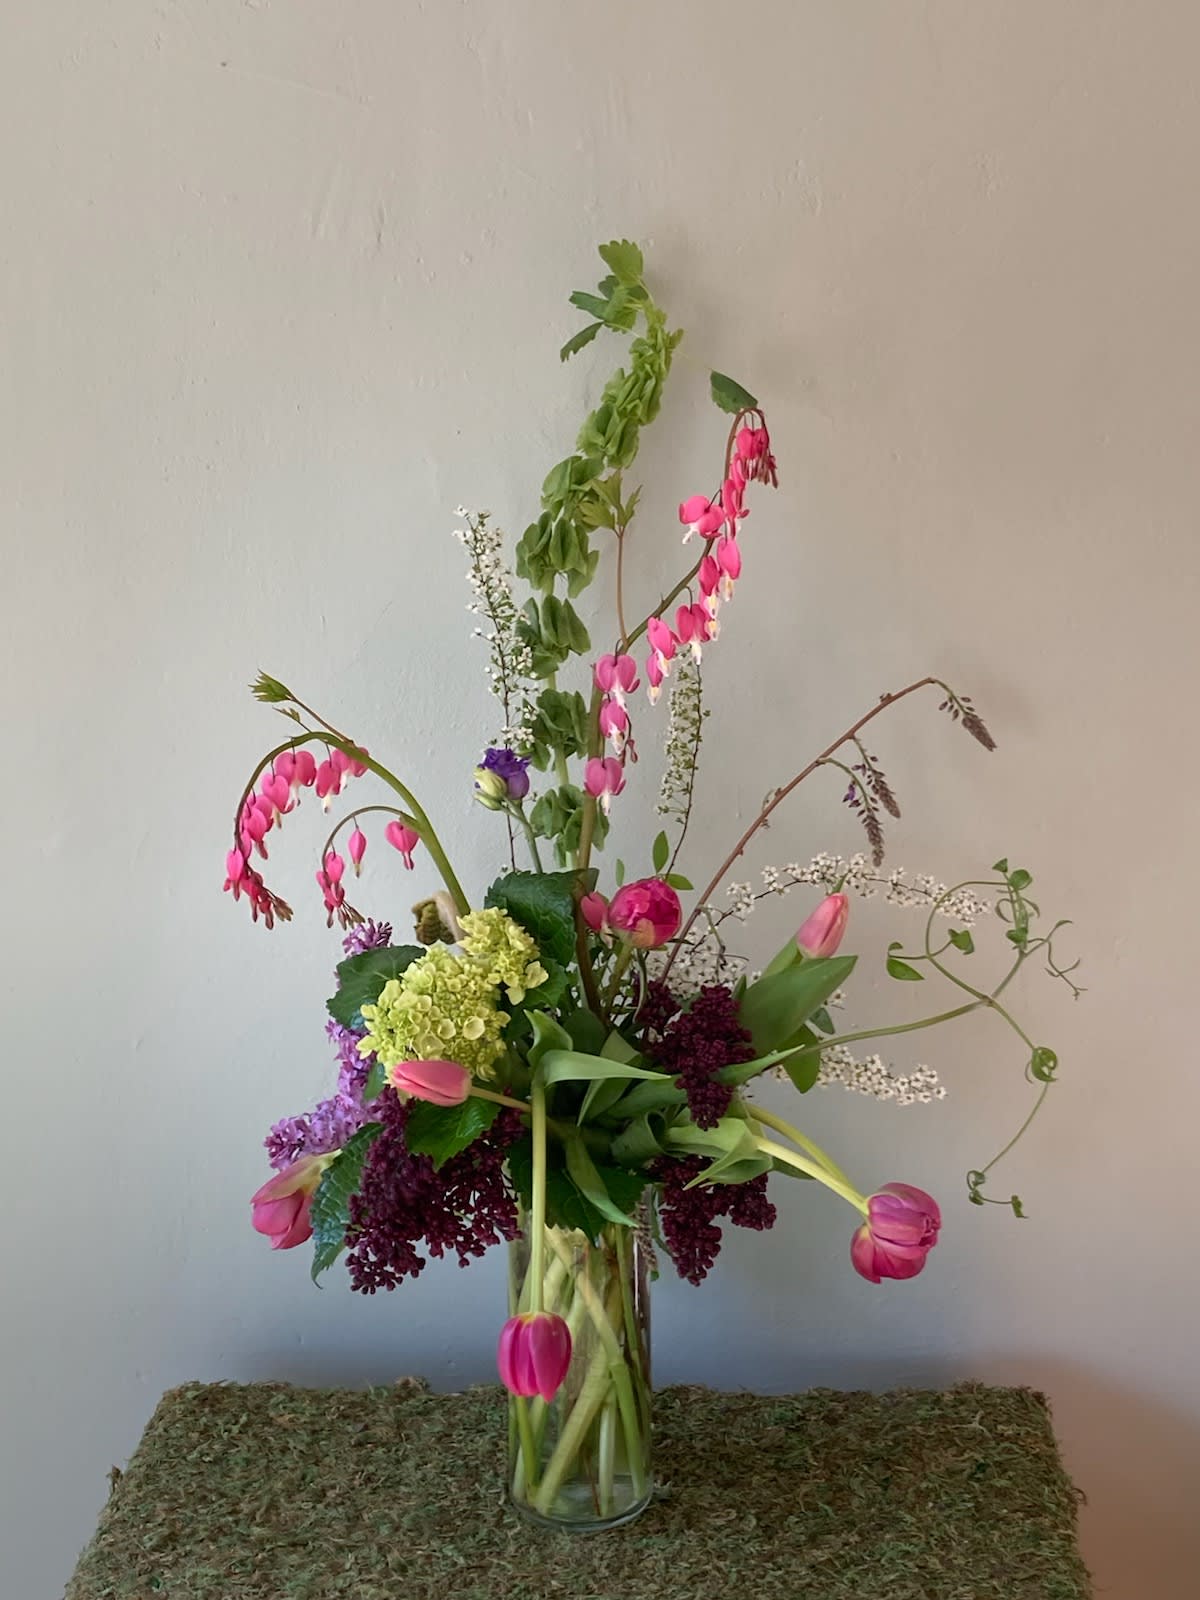 Designer's Choice - A one of a kind seasonal flower arrangement beautifully designed using in season blooms in a glass vase or box.  Inspiration will come from whichever flowers are the most stunning of the season.